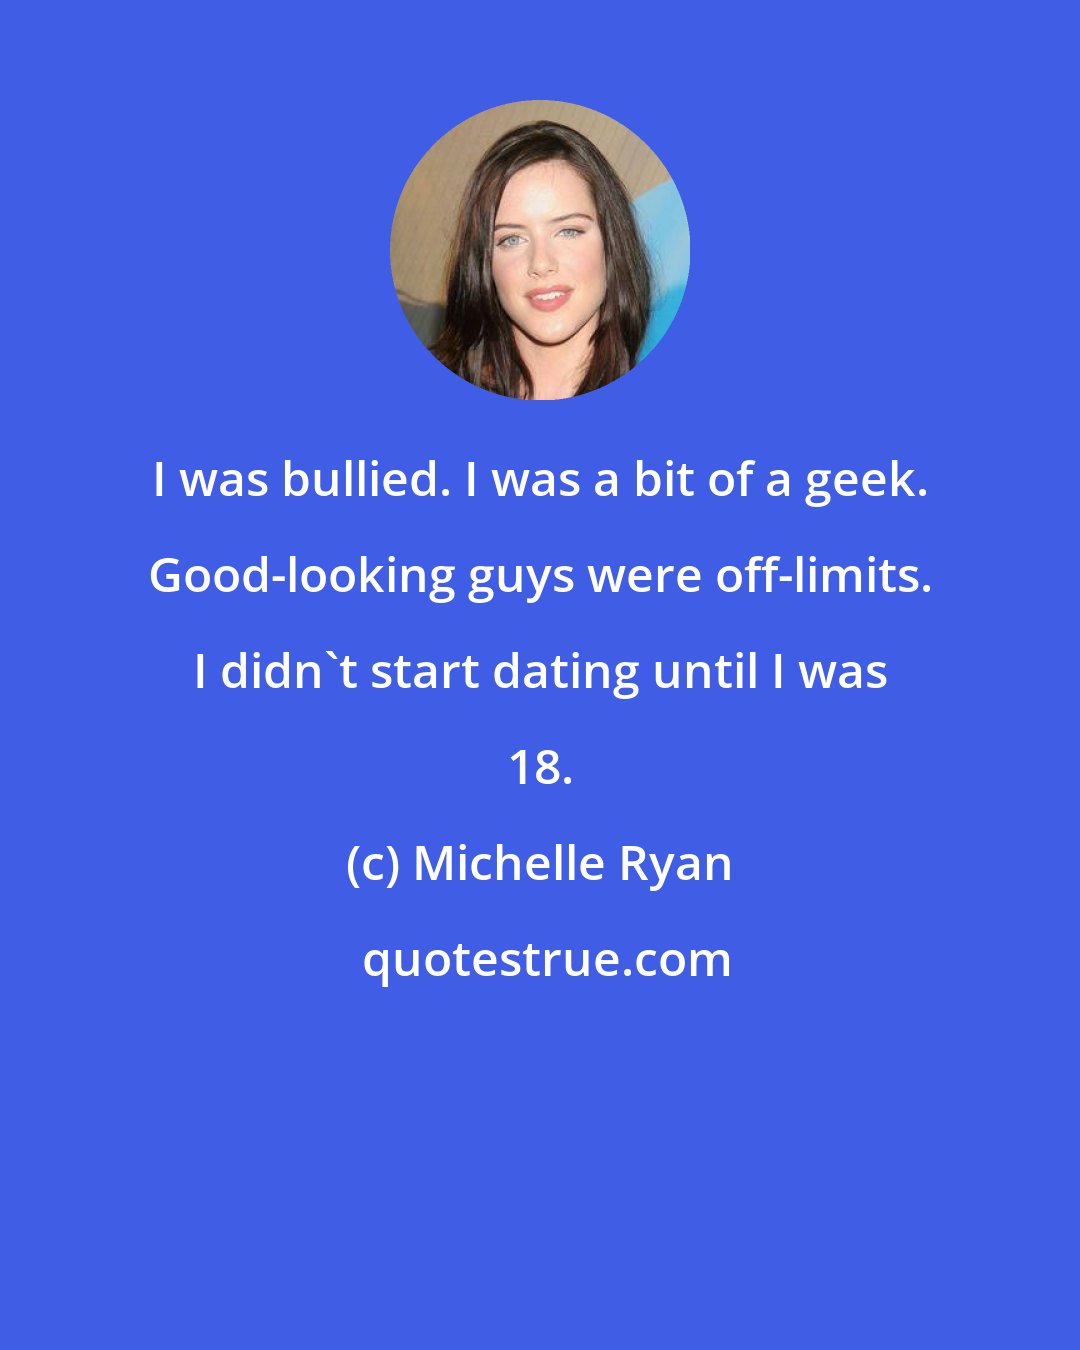 Michelle Ryan: I was bullied. I was a bit of a geek. Good-looking guys were off-limits. I didn't start dating until I was 18.